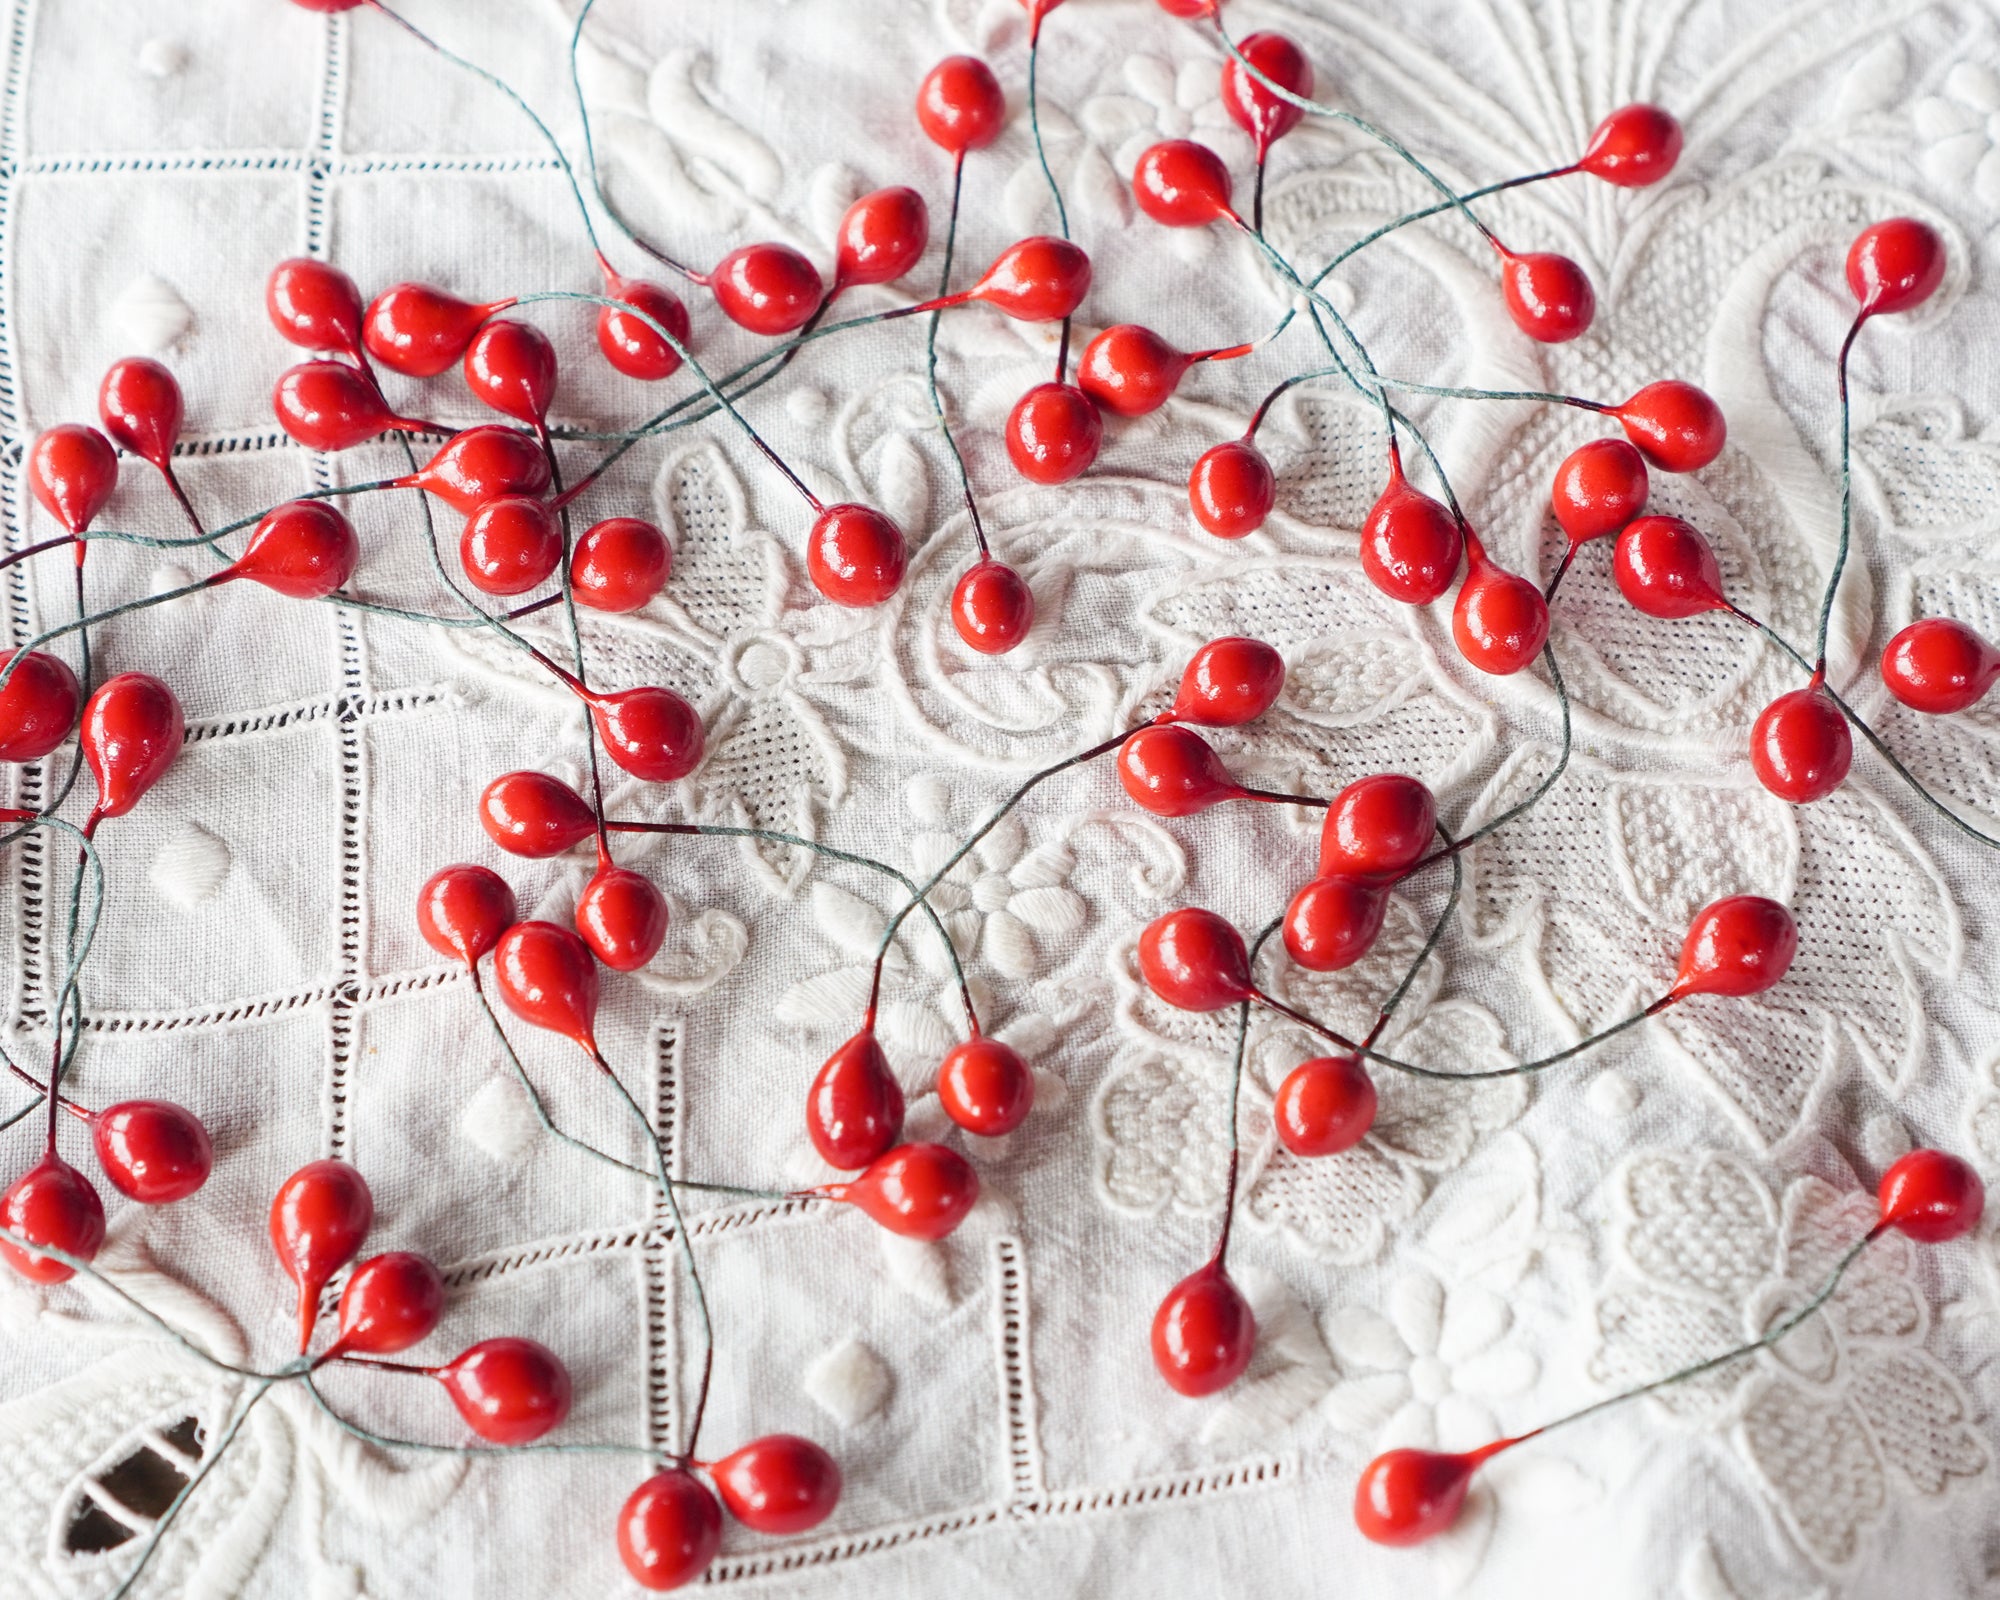 Holly Berry Stems - Double-Ended Red Berries on Wire Stems, 36 Pcs. – Smile  Mercantile Craft Co.